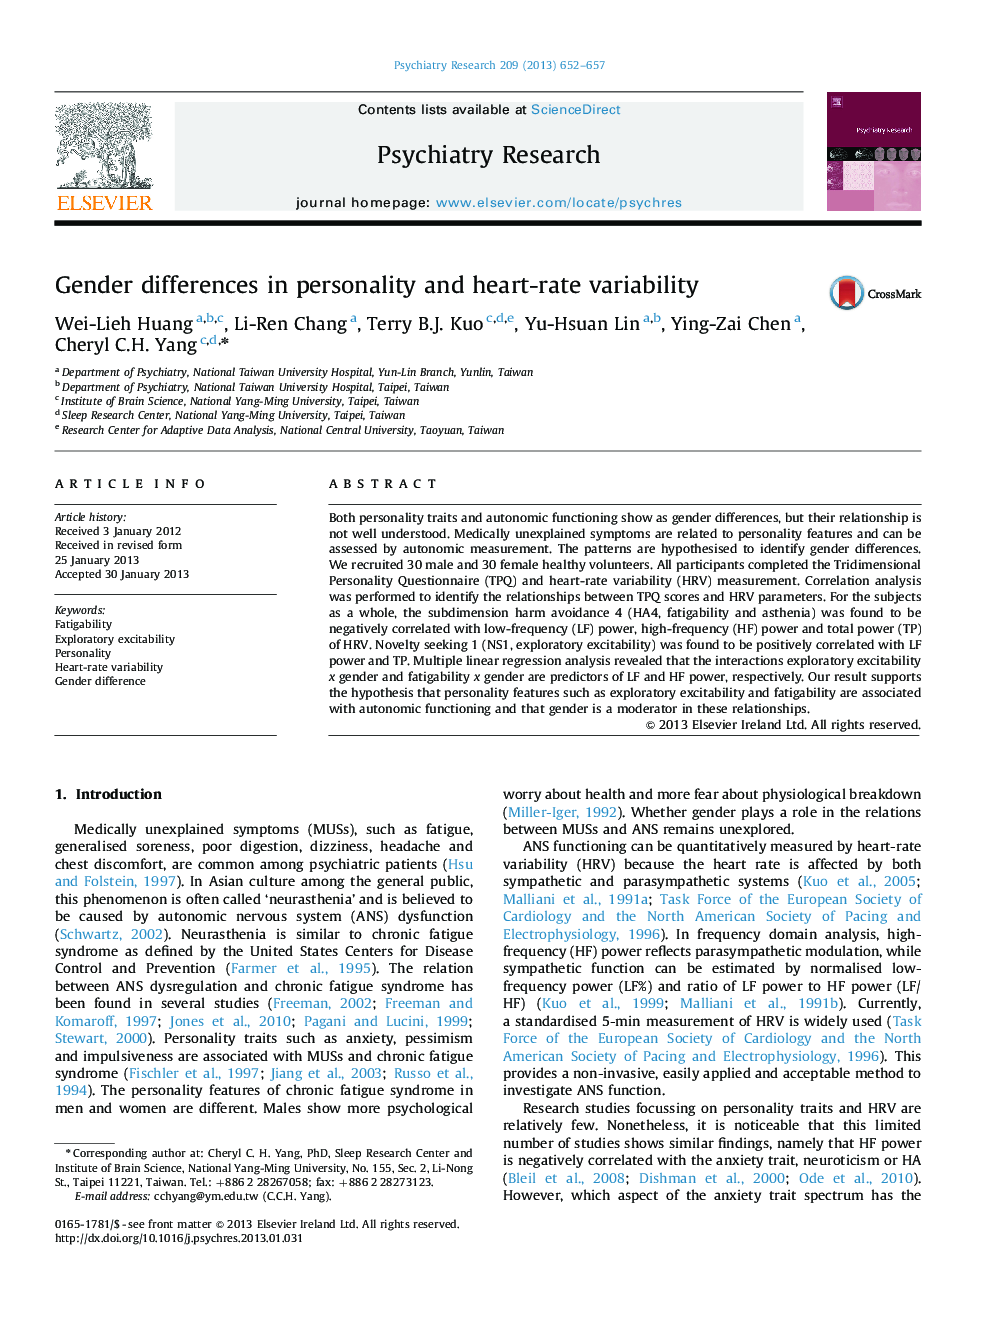 Gender differences in personality and heart-rate variability